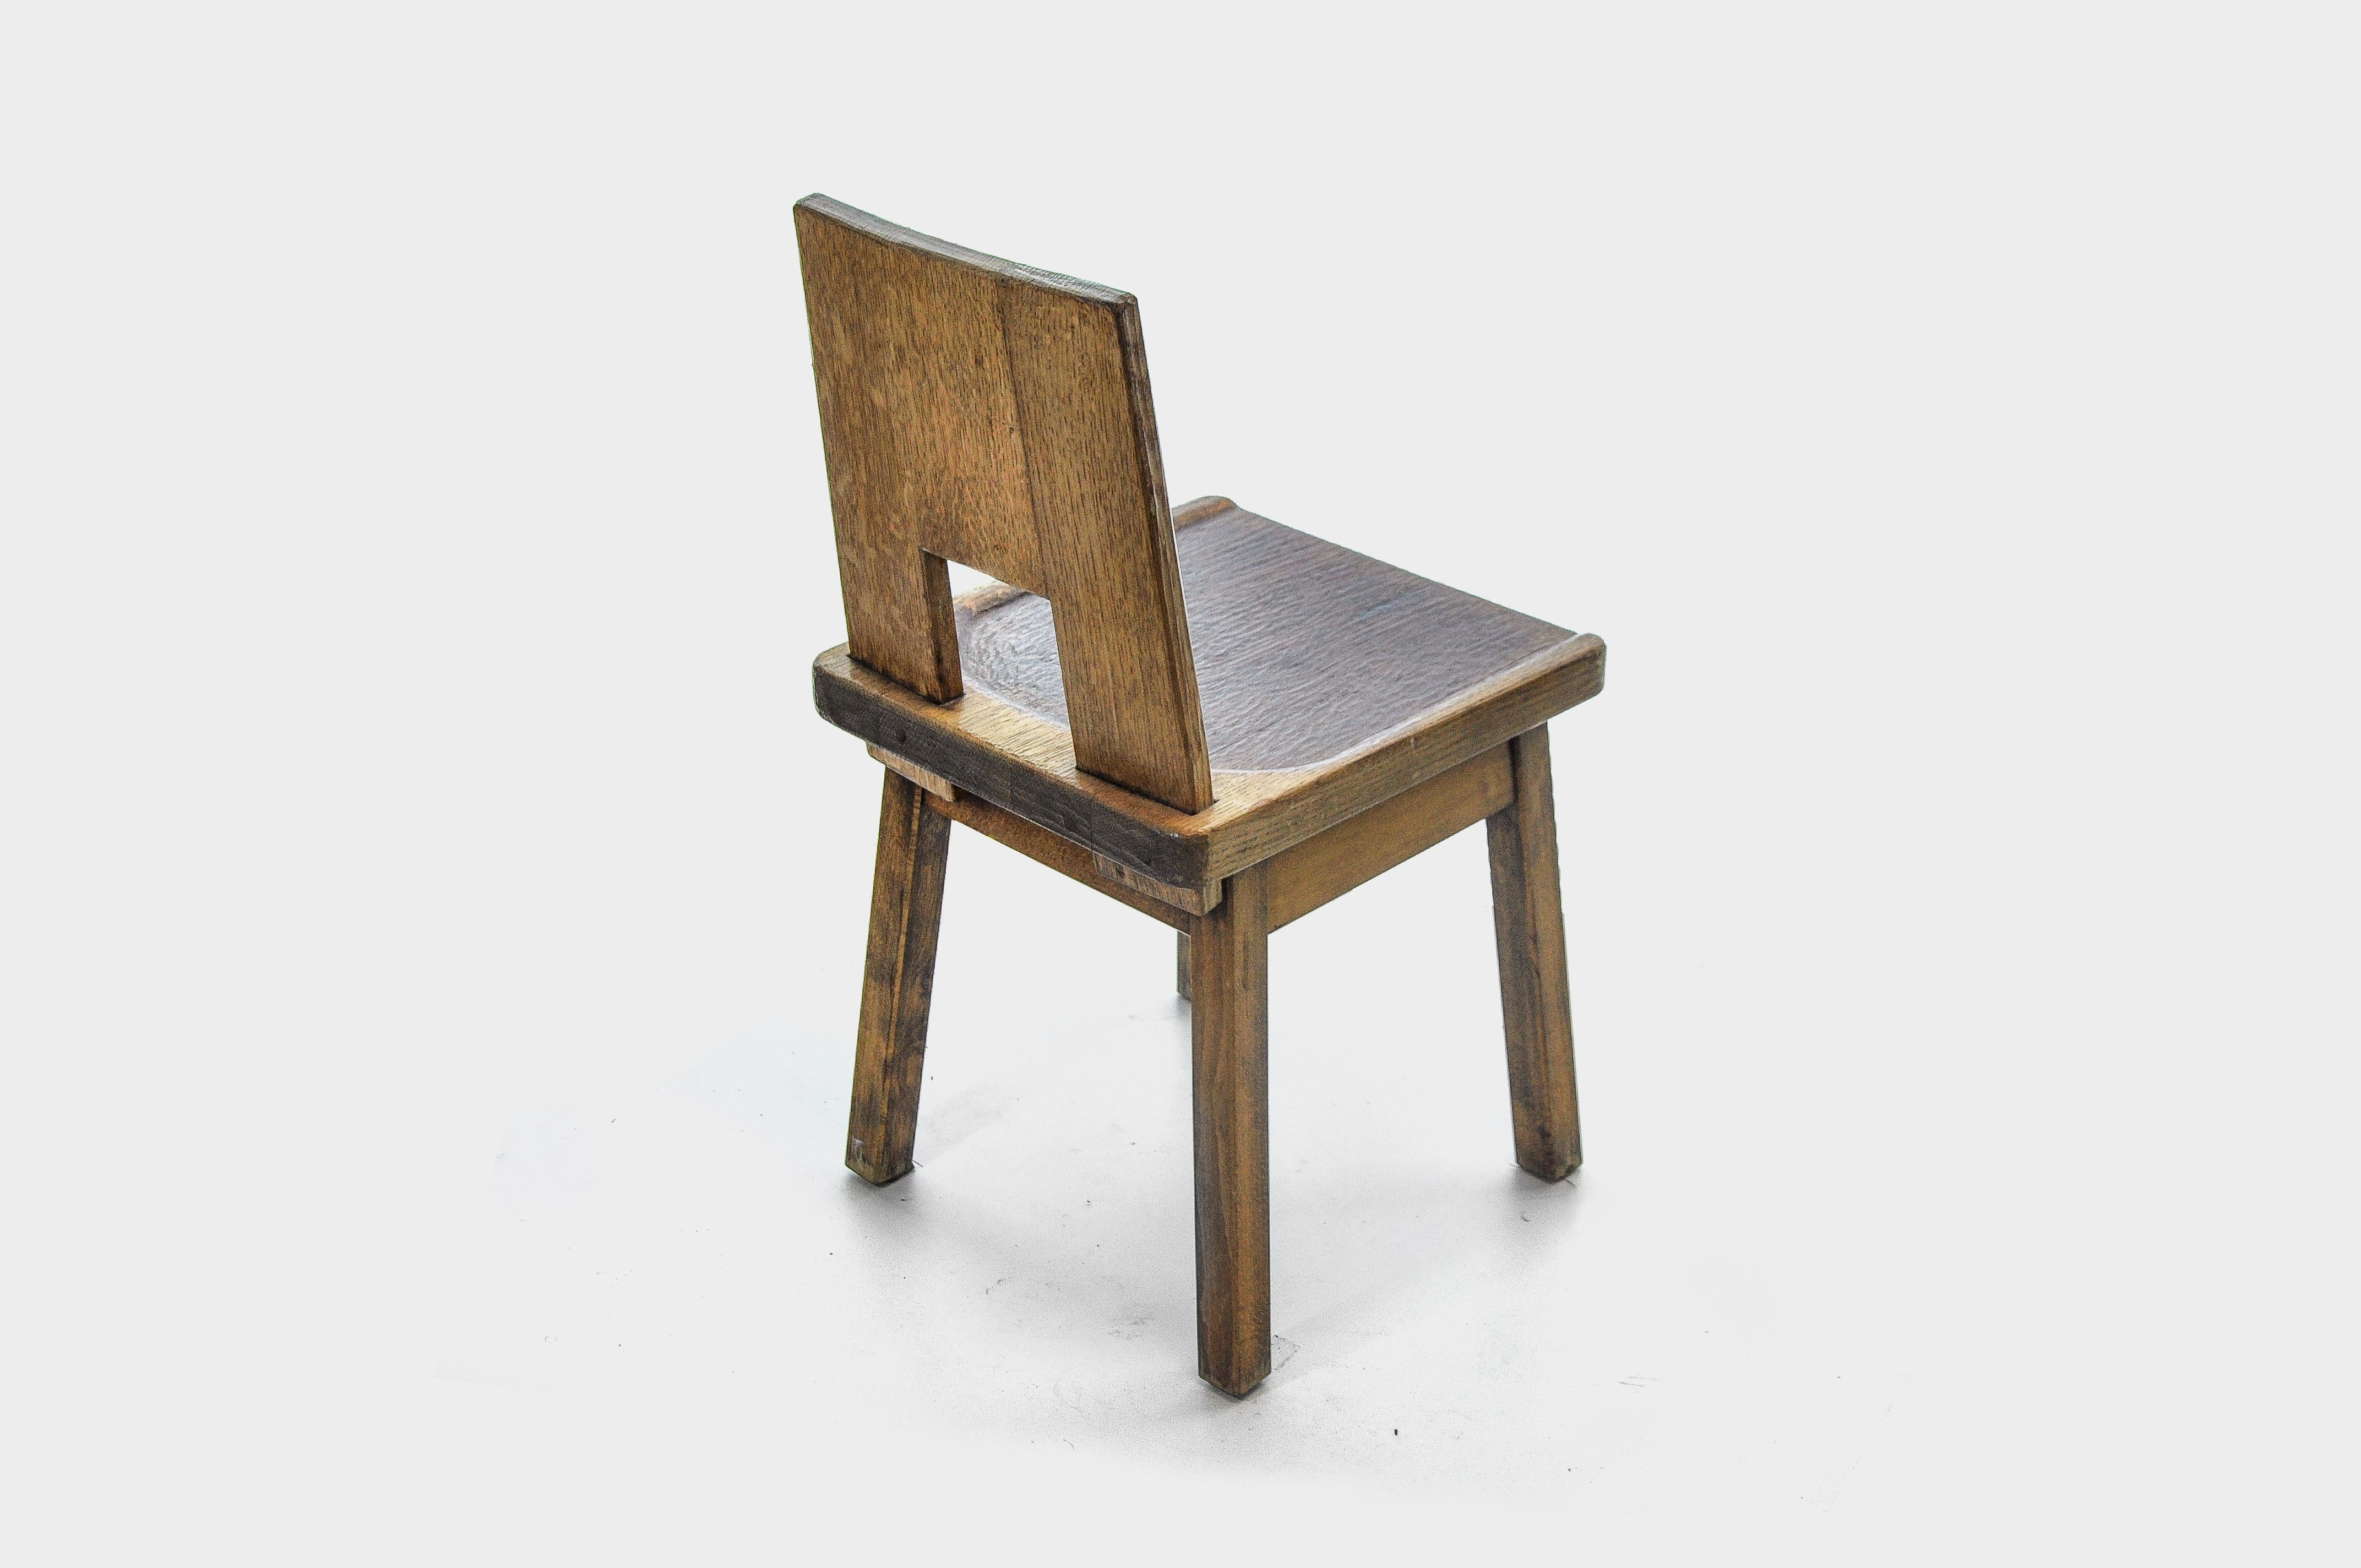 Hand Carved, Brutalistic Chairs Made of Solid Oak 4